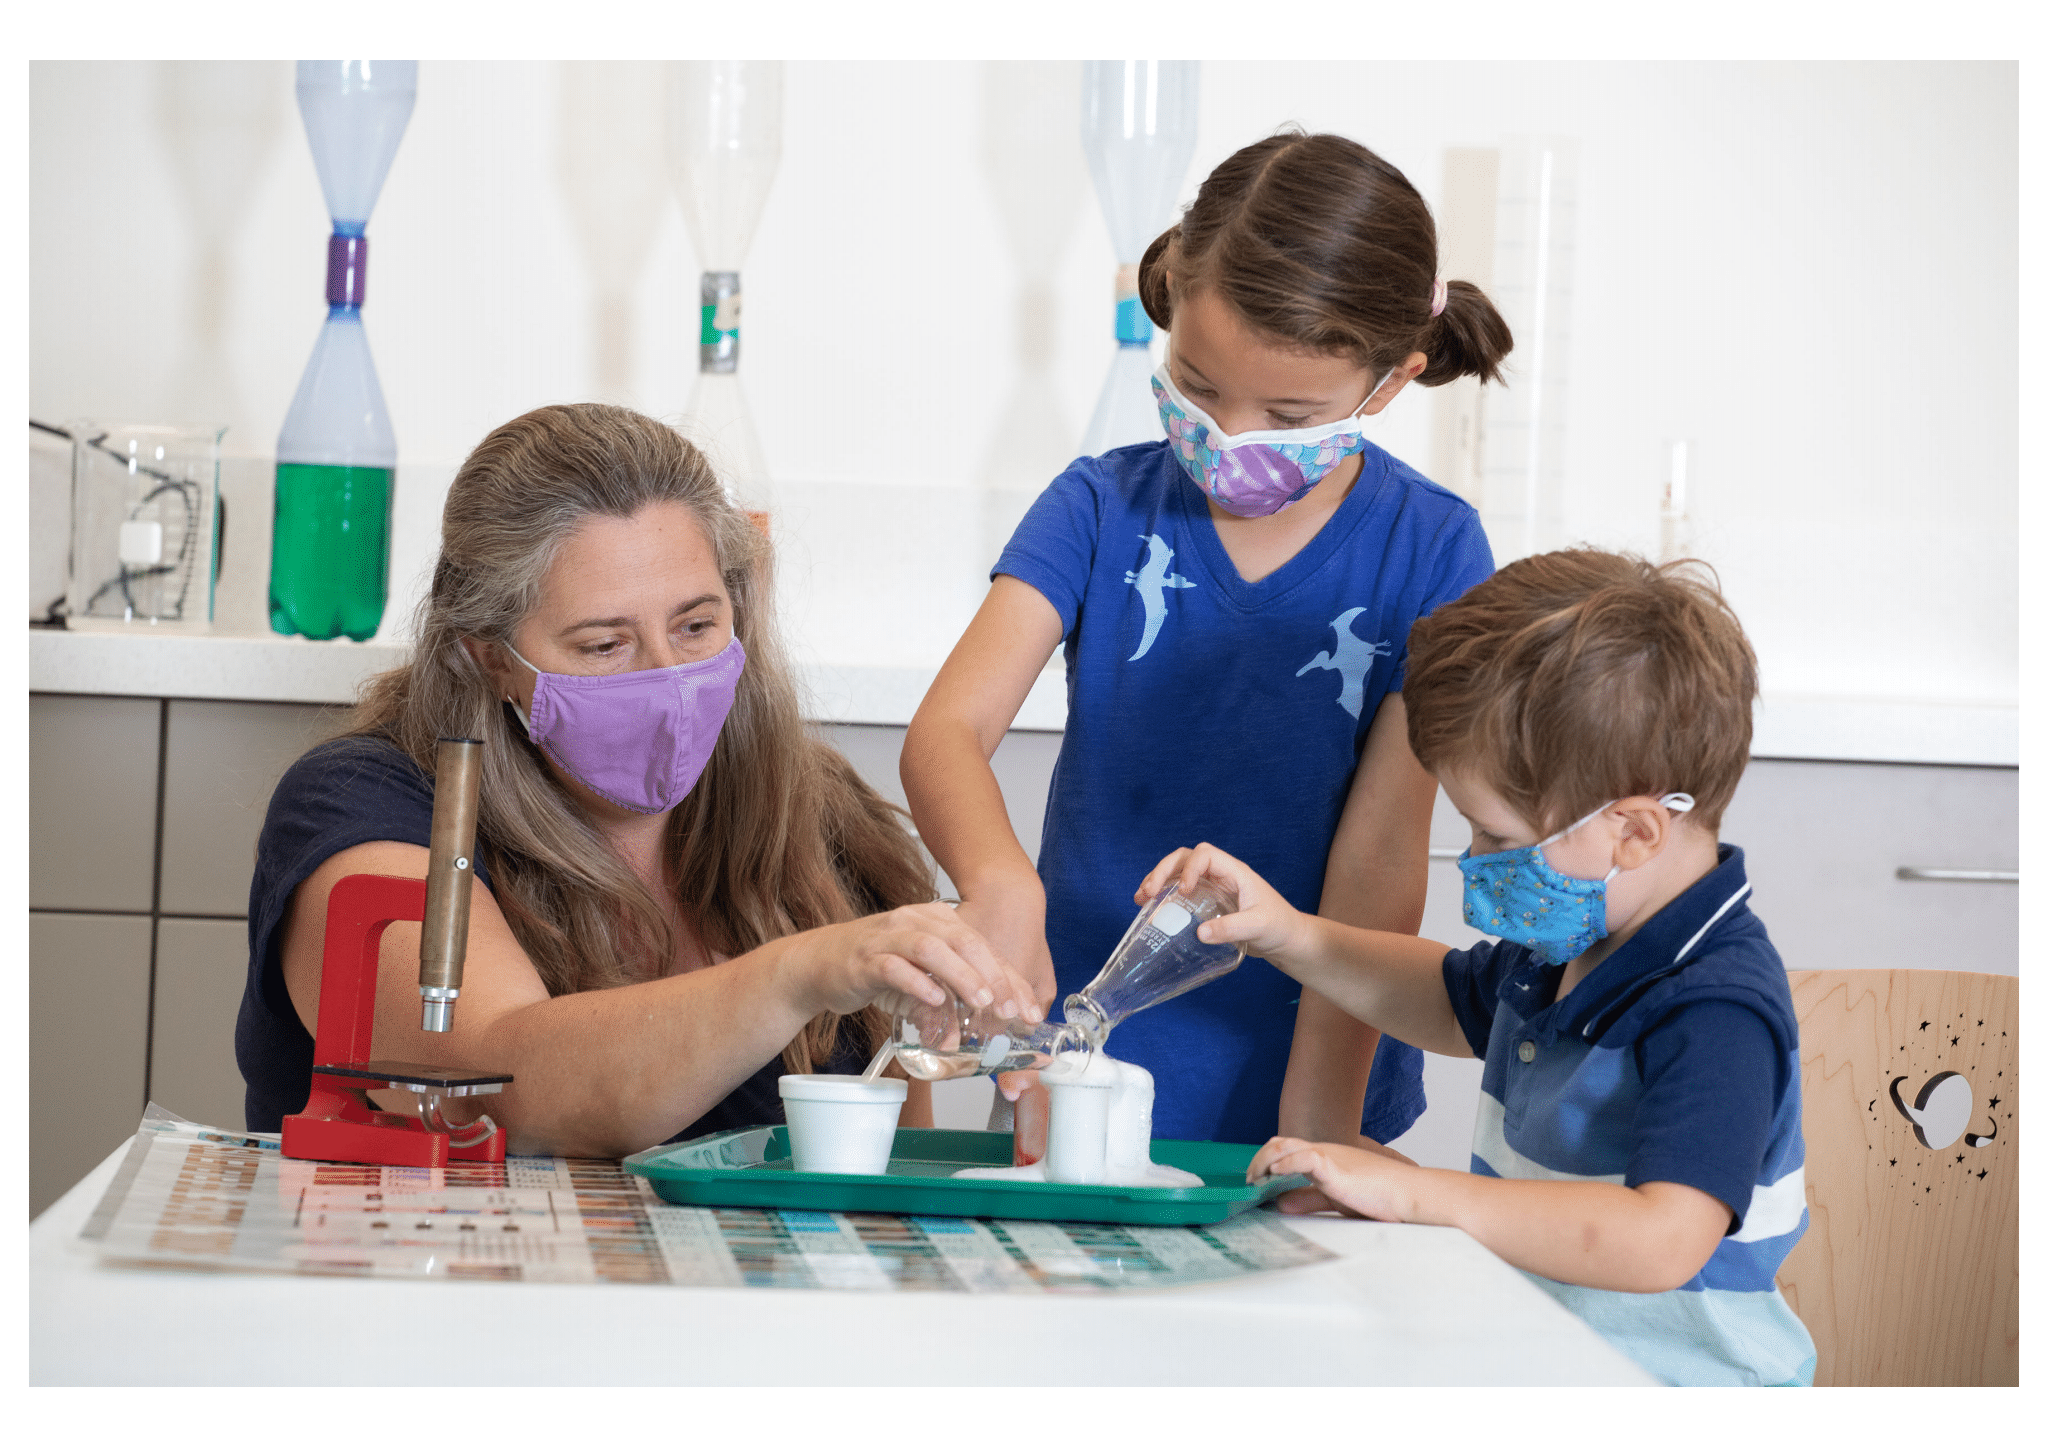 Science Program with Educator and Two Kids